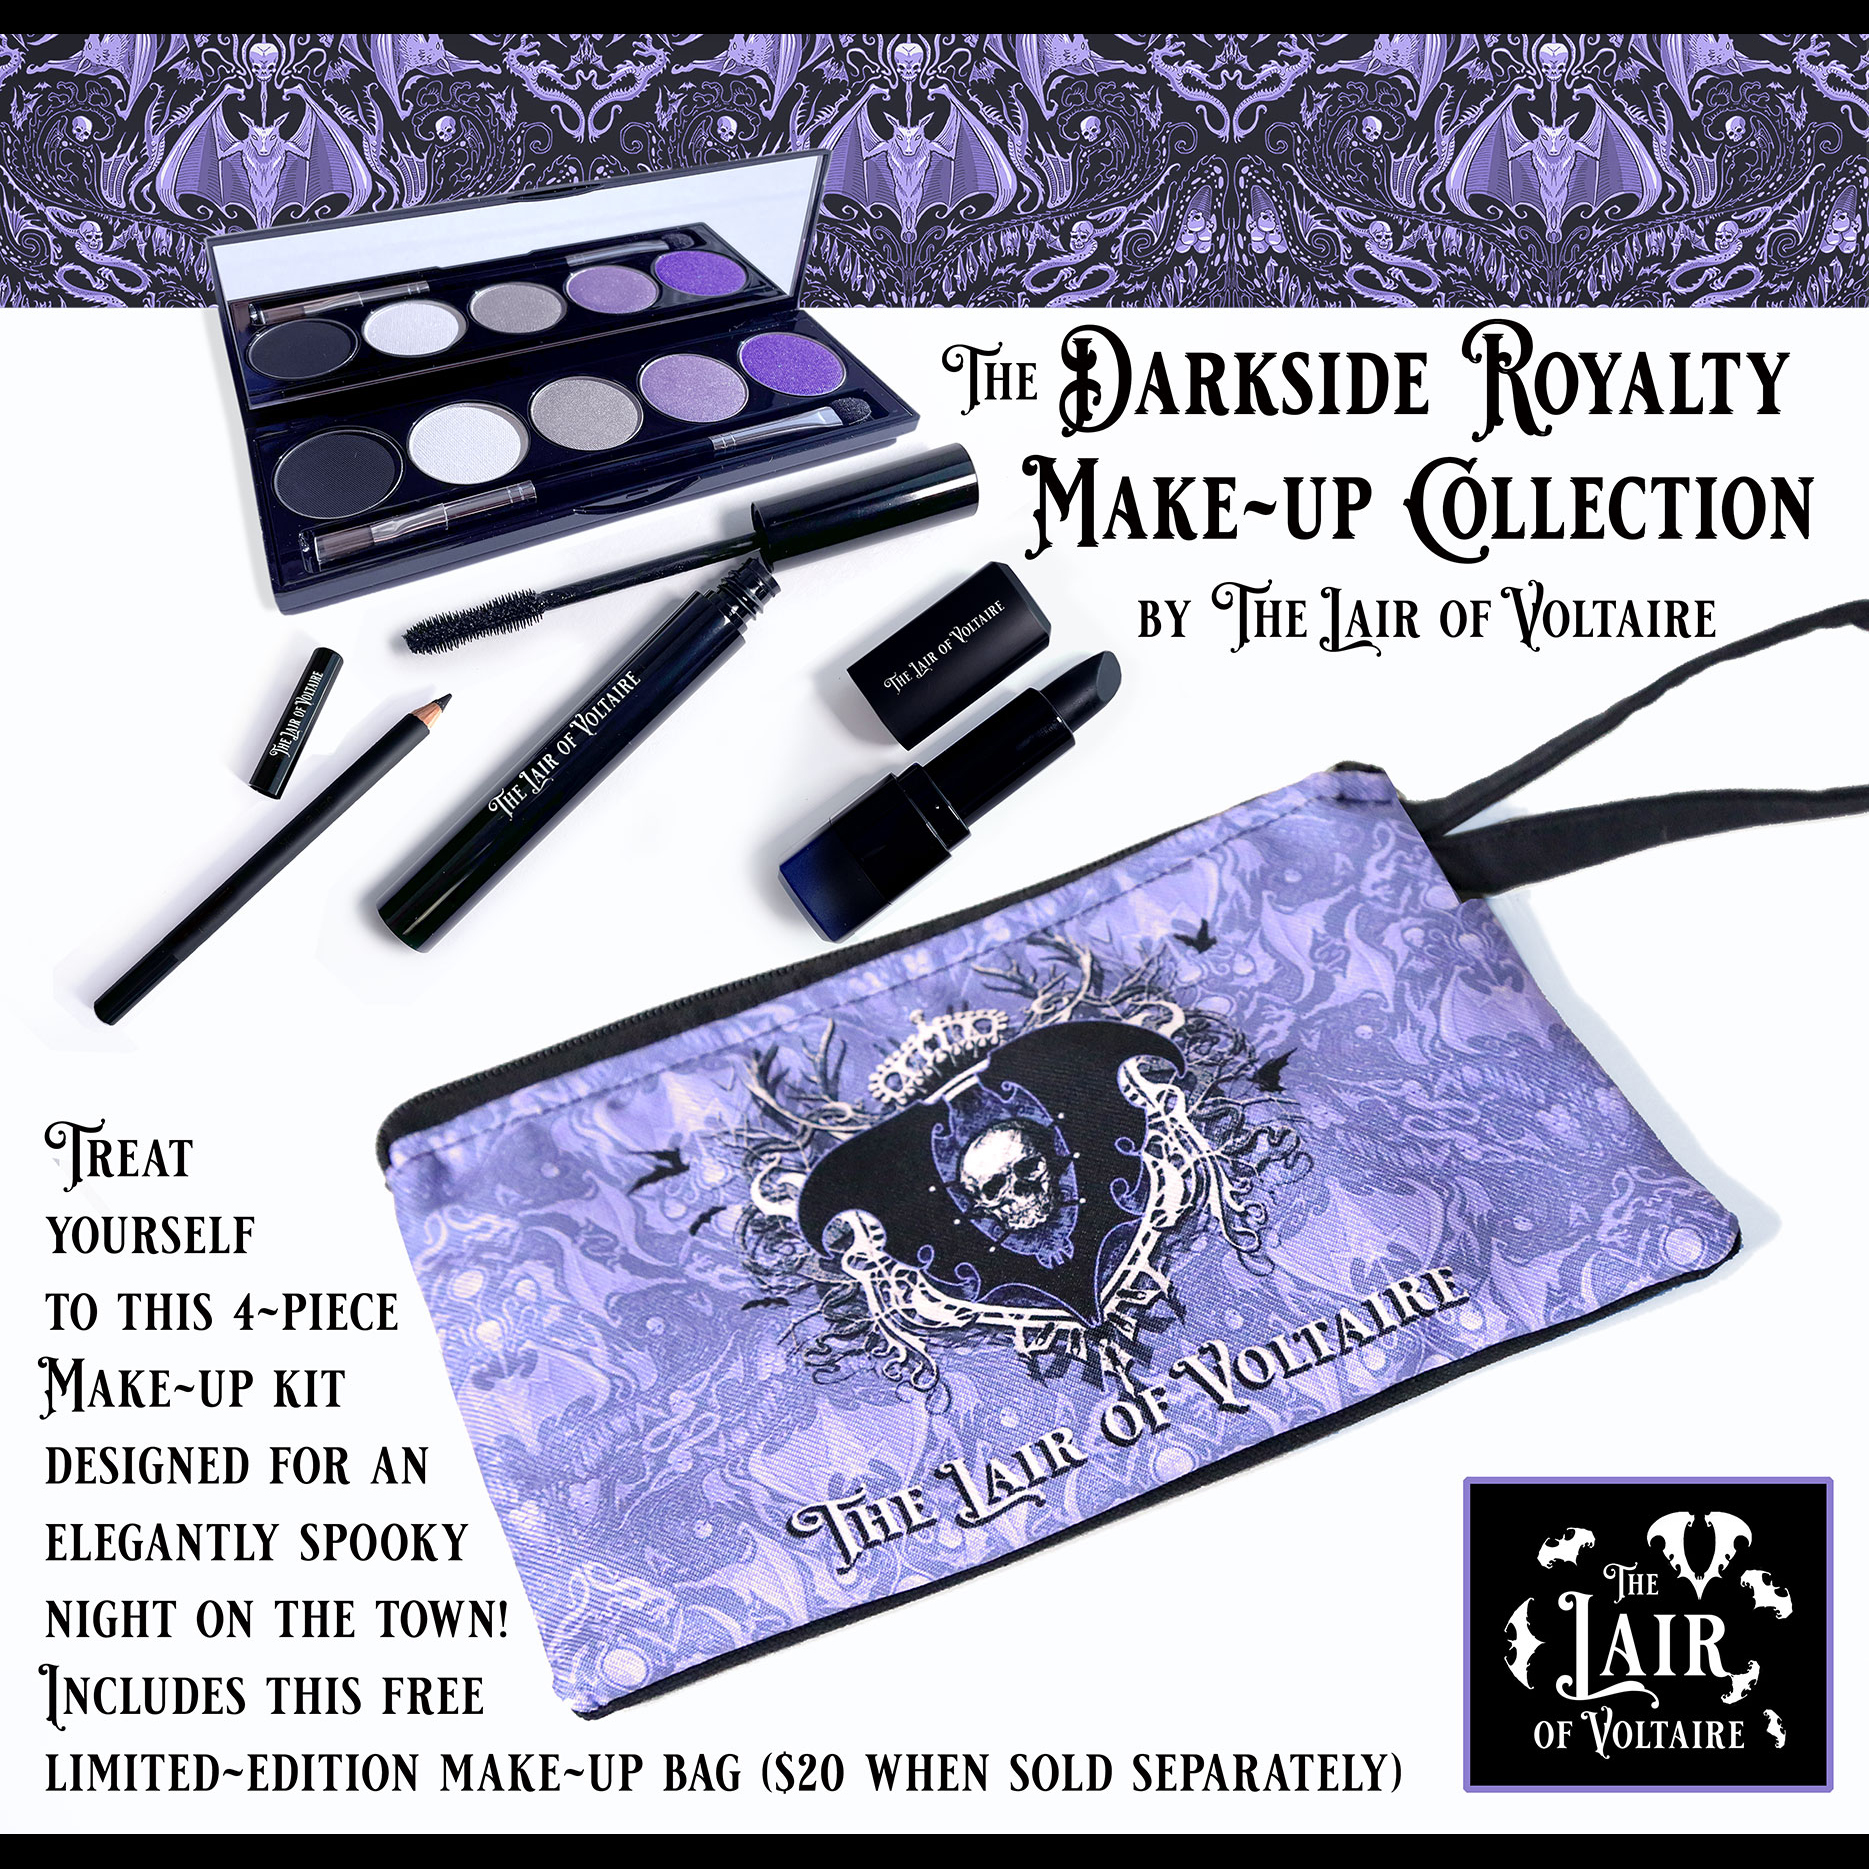 The Darkside Royalty Make-Up Collection by The Lair of Voltaire